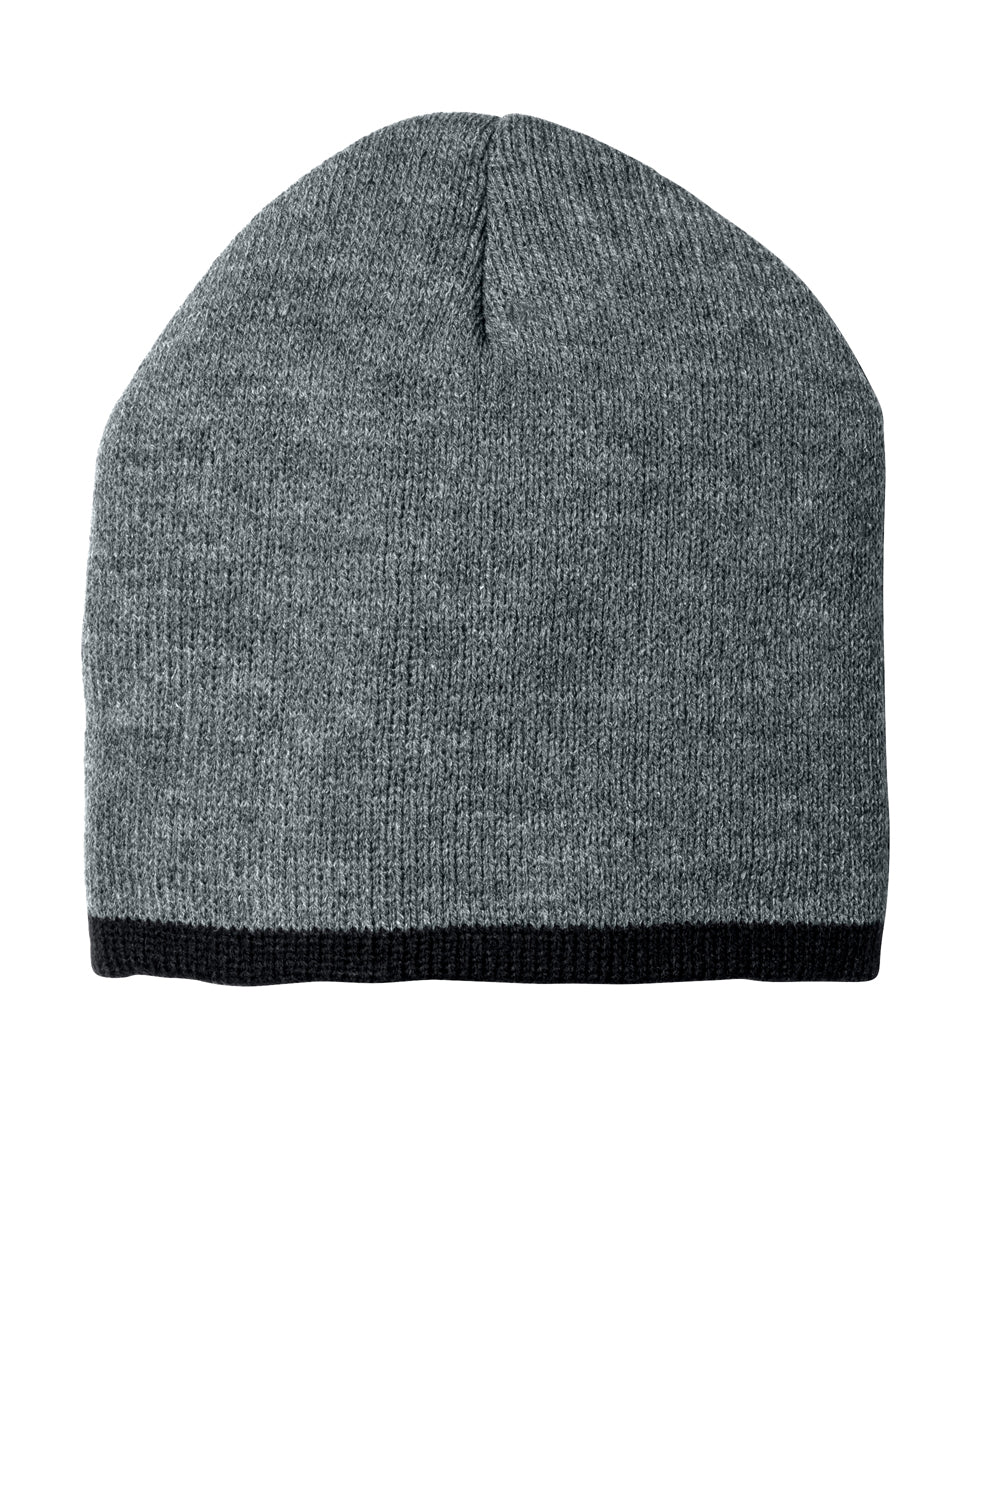 Port & Company CP91 Beanie Athletic Oxford Grey/Black Front